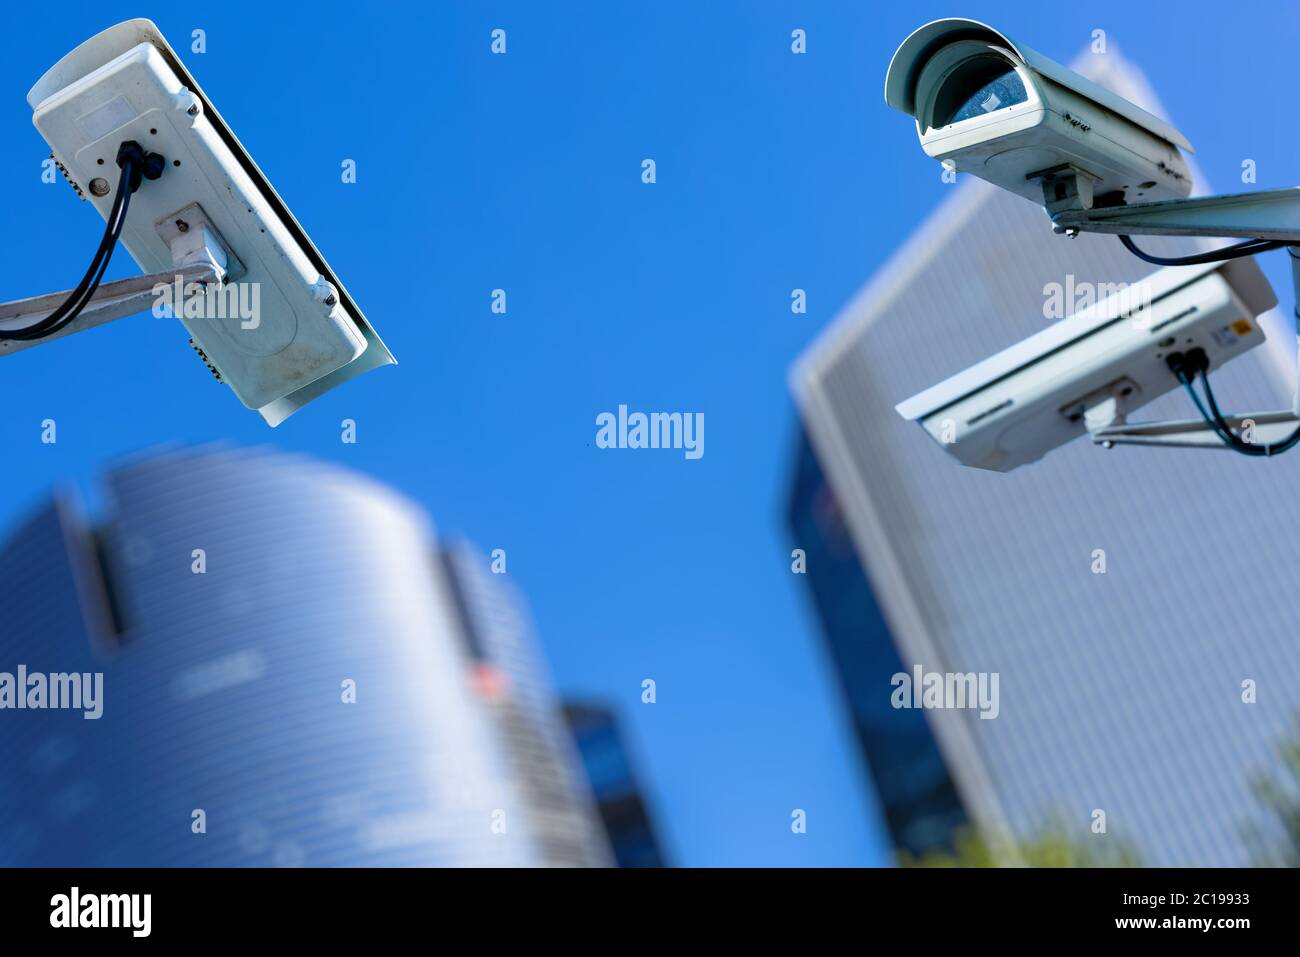 two cctv security camera in a city with blury business building on background Stock Photo